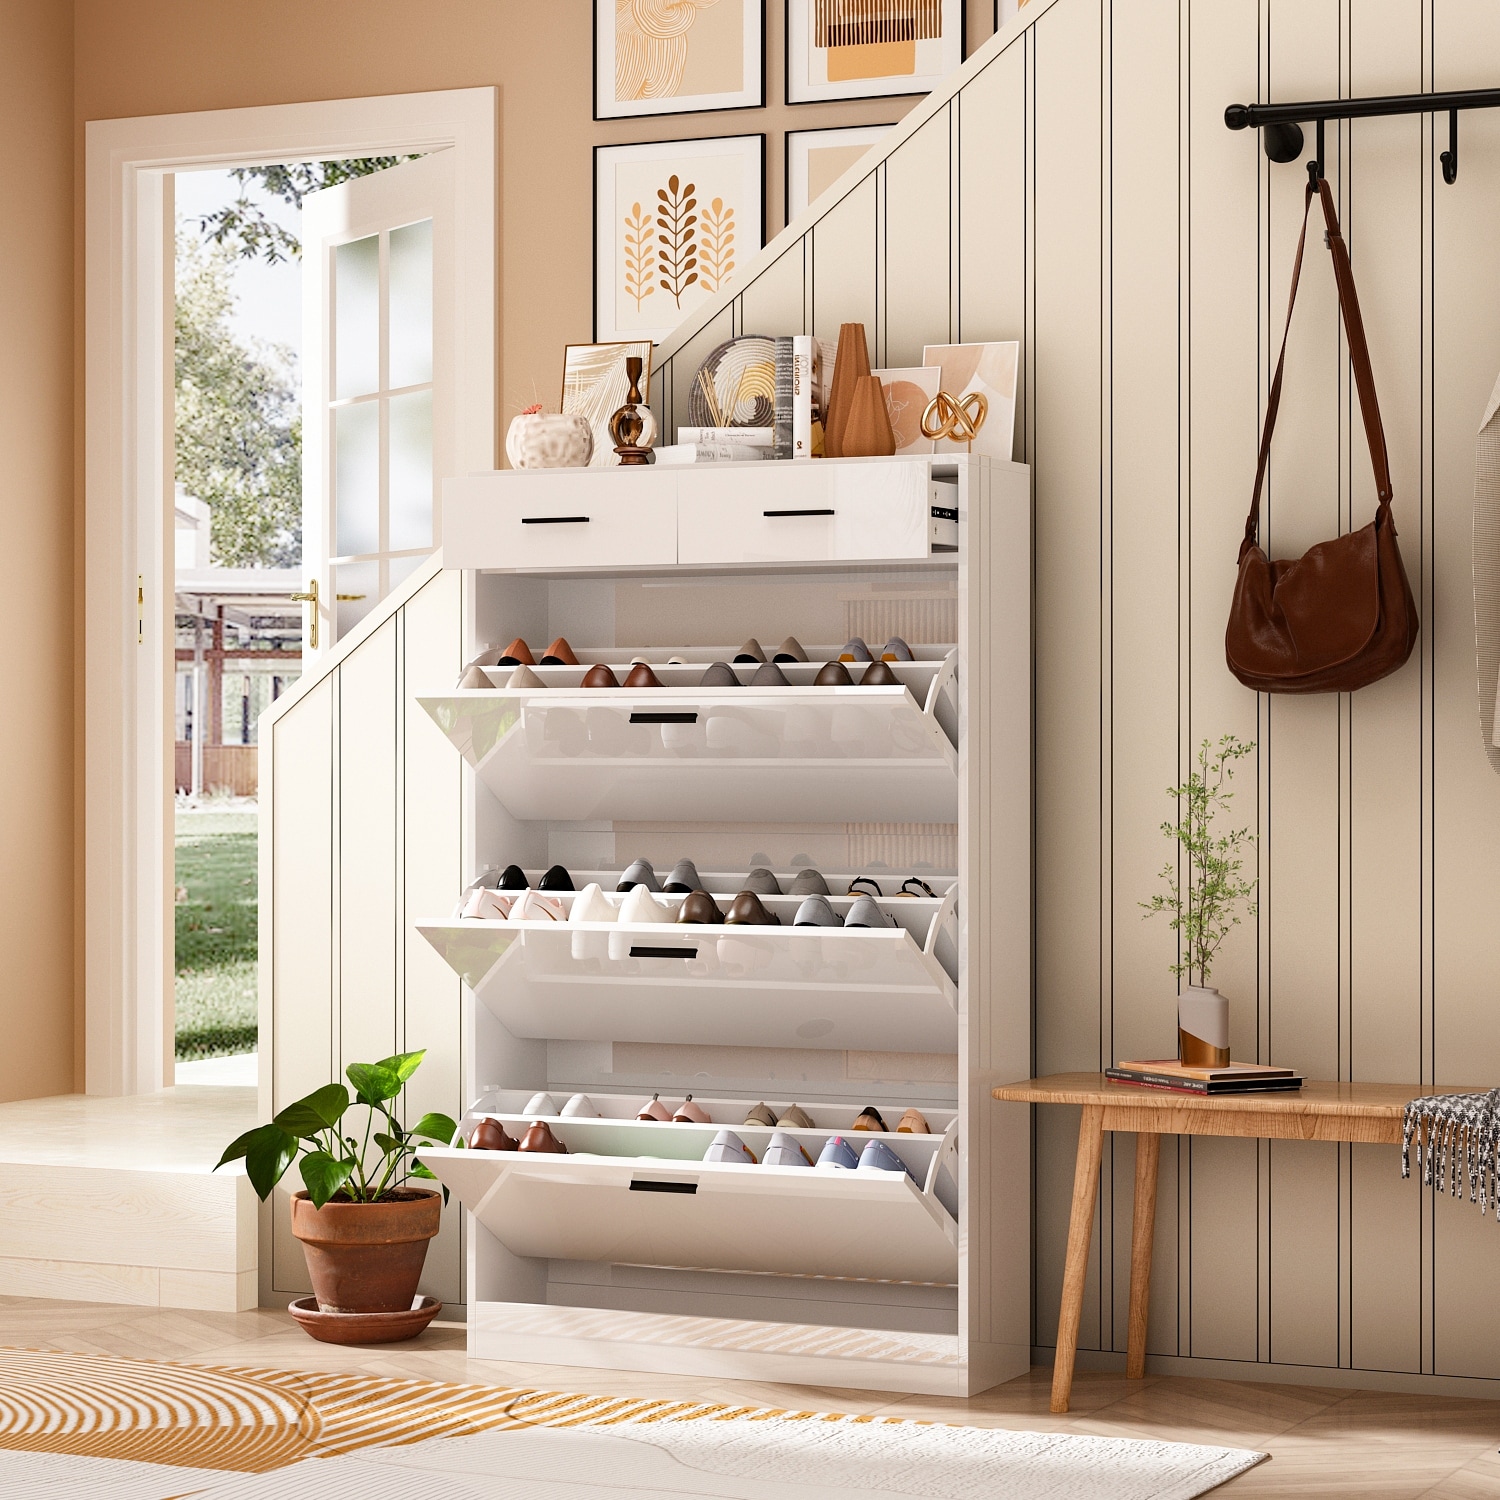 https://ak1.ostkcdn.com/images/products/is/images/direct/012d0a1f4fa5d558db3ebd54bcce69a37b44c4b0/Modern-Shoe-Storage-Cabinet-with-5-Drawer-Shoe-Rack-Storage-Organizer.jpg